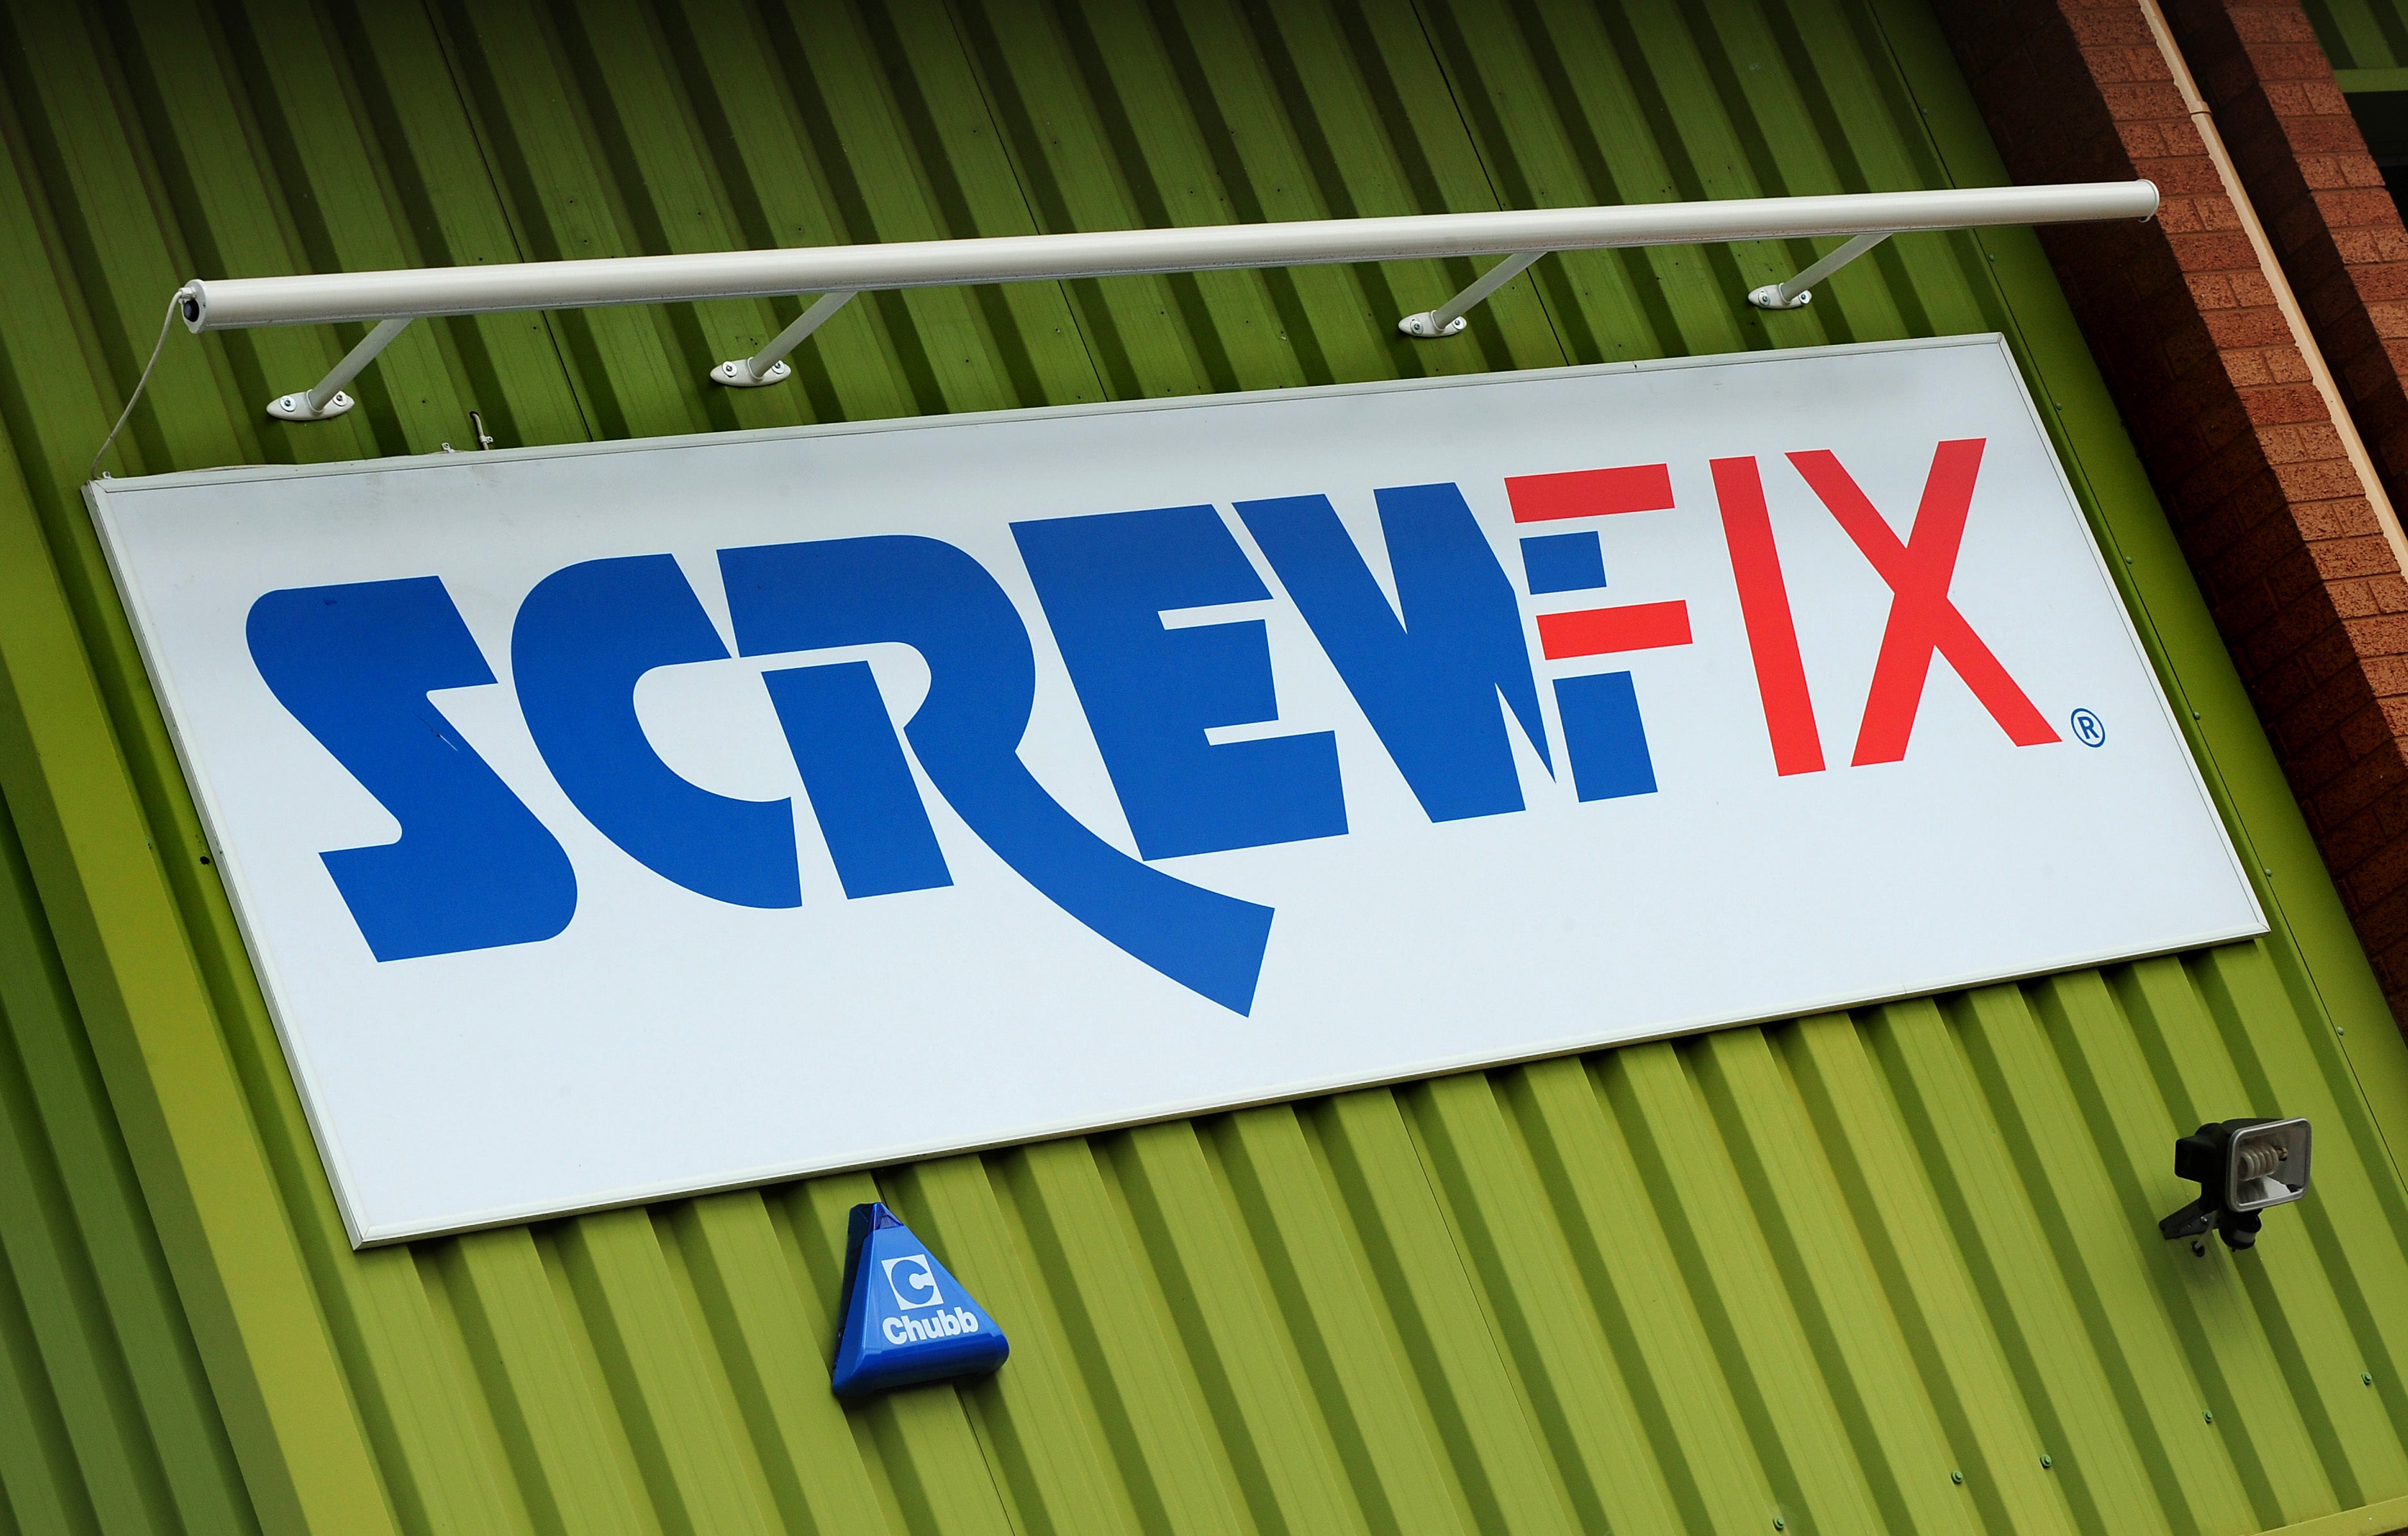 Screwfix to open 80 stores with 800 new jobs | The Independent